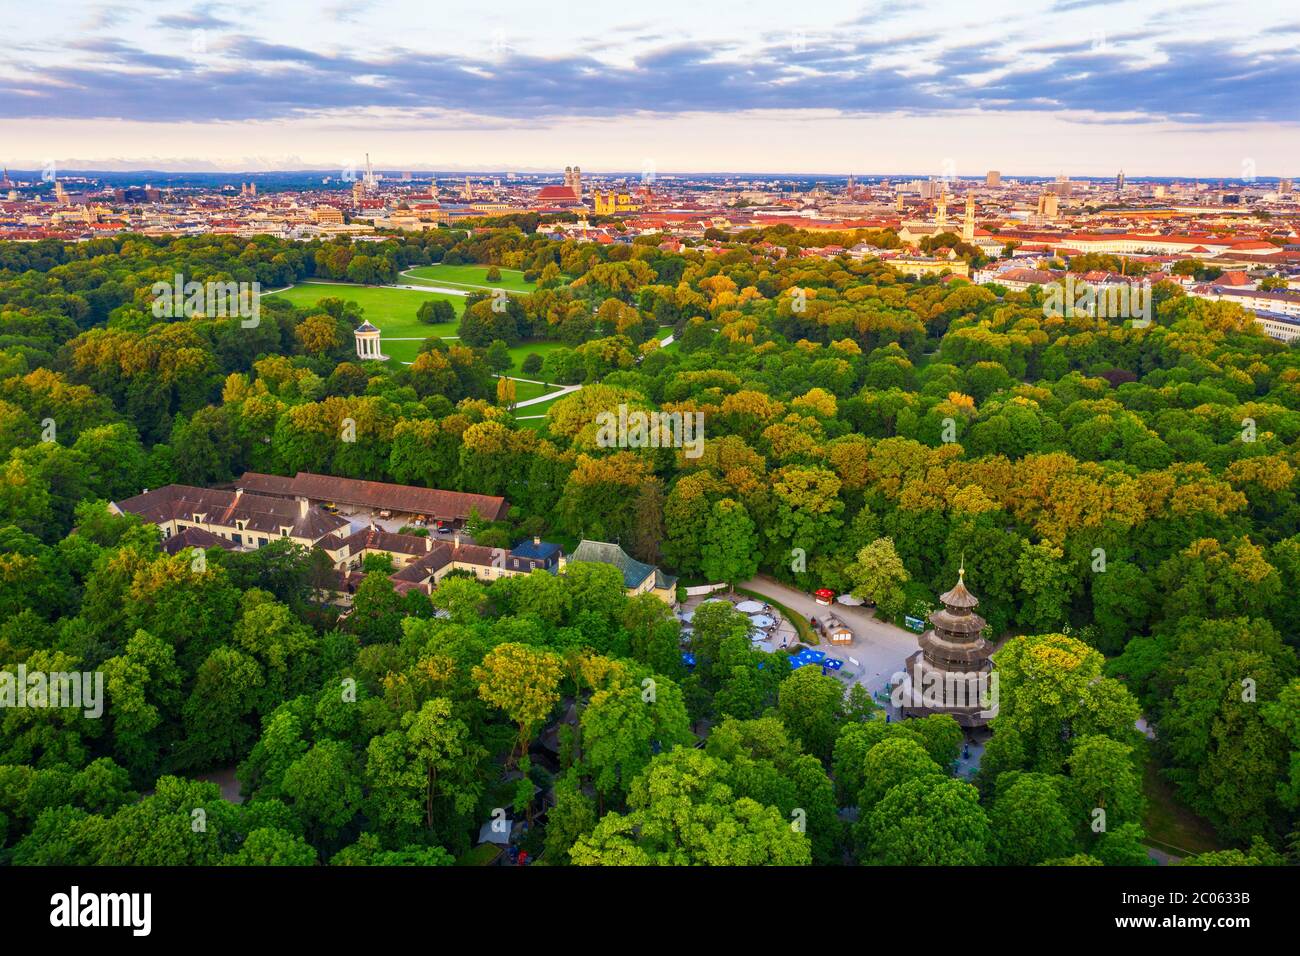 Chinese Tower, Monopteros and Economy Building, English Garden, View over the city centre in the morning light, Munich, aerial view, Upper Bavaria Stock Photo